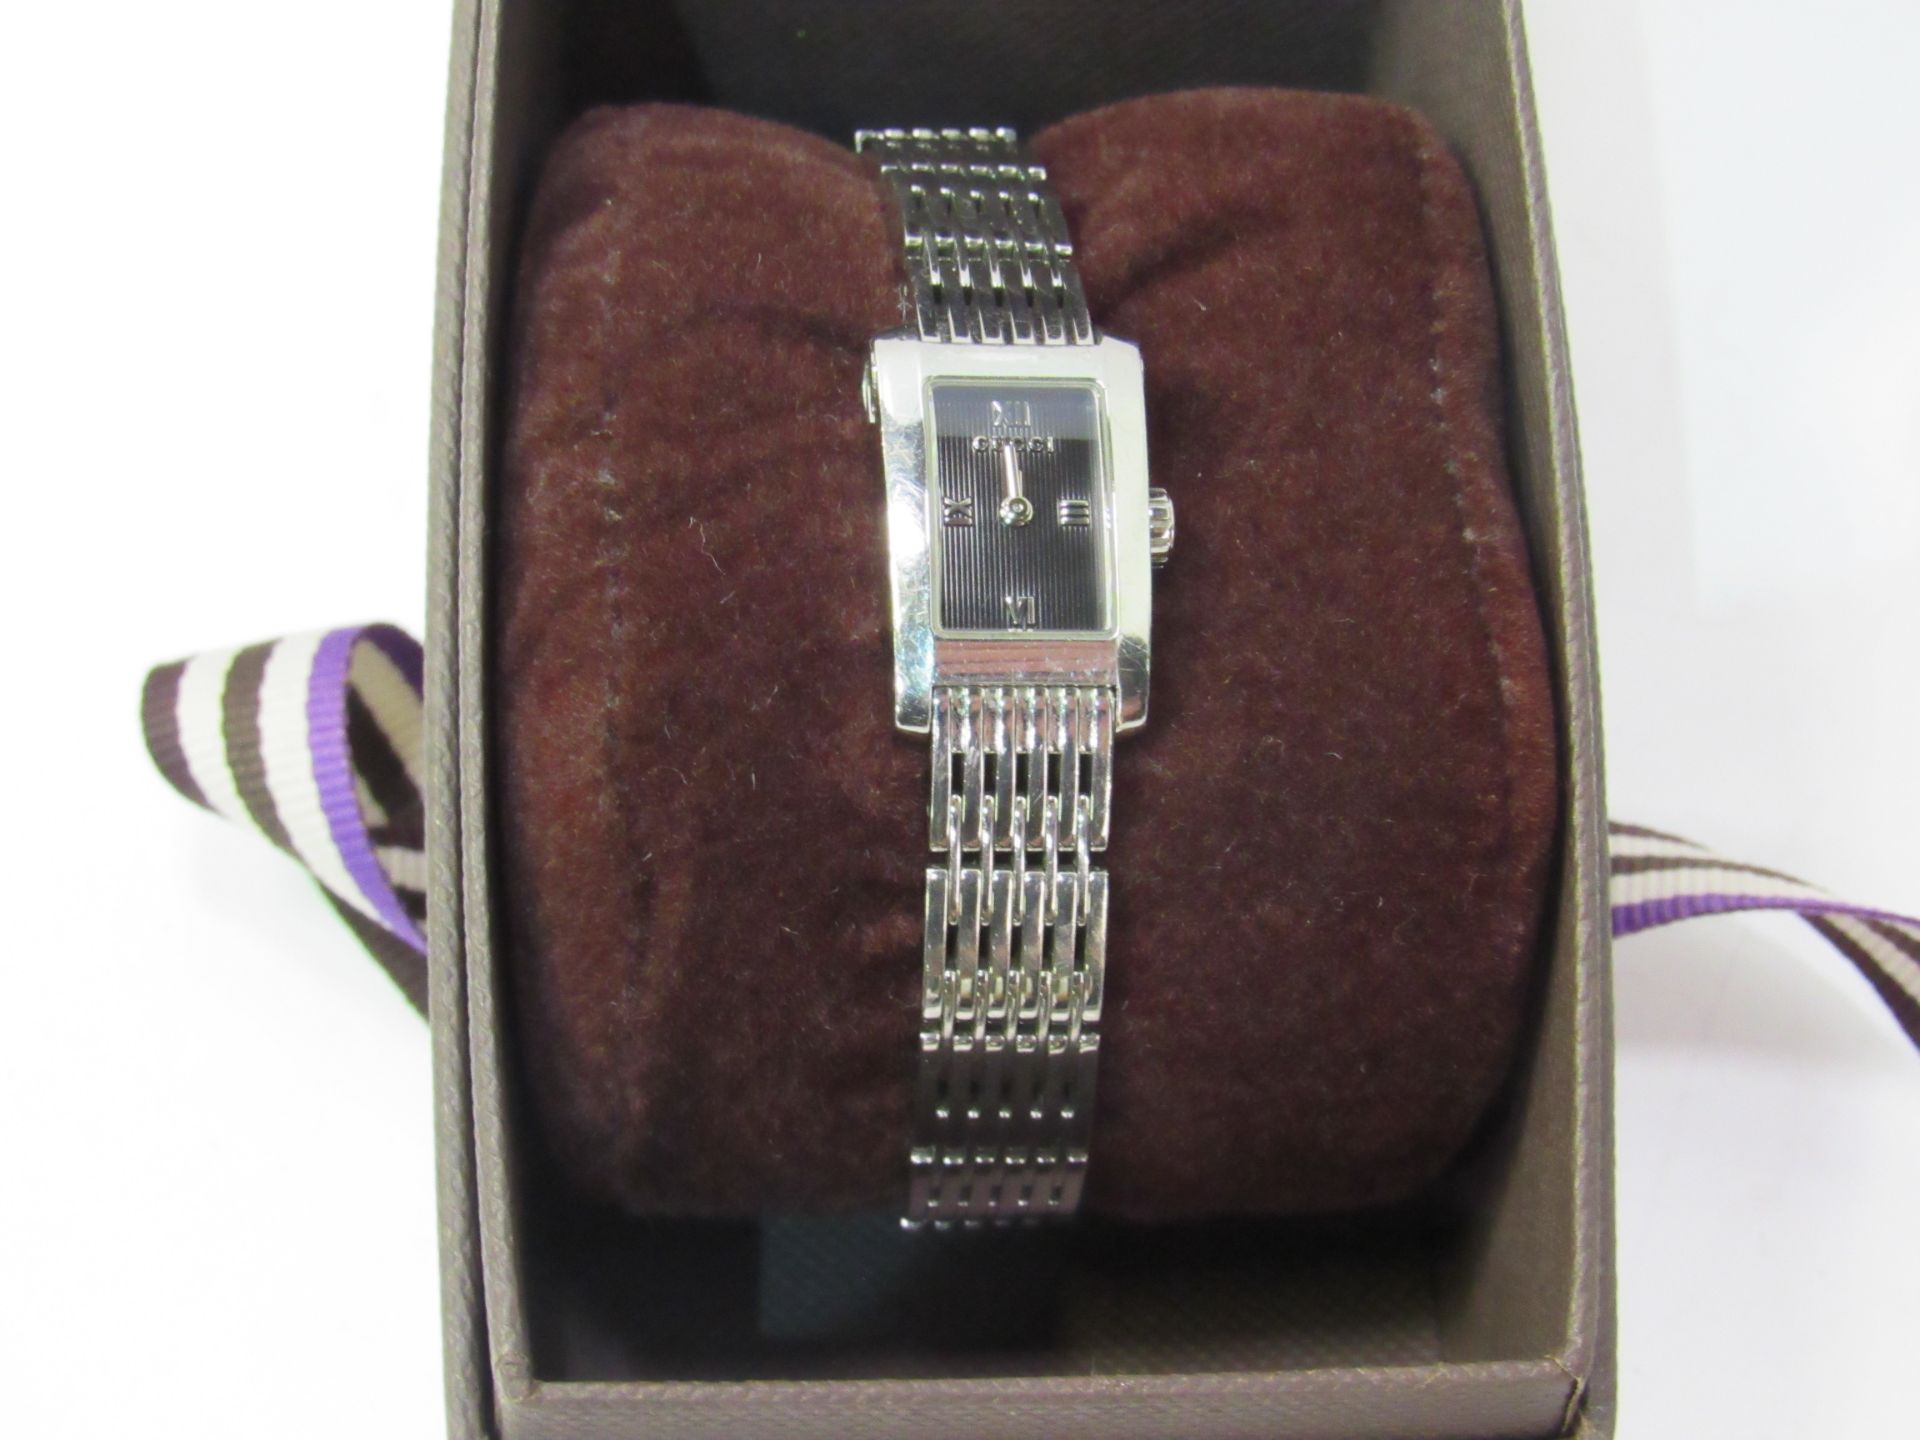 Gucci Lady's Dress Watch, having code number, in jeweller's display box. Estimate £30-50.